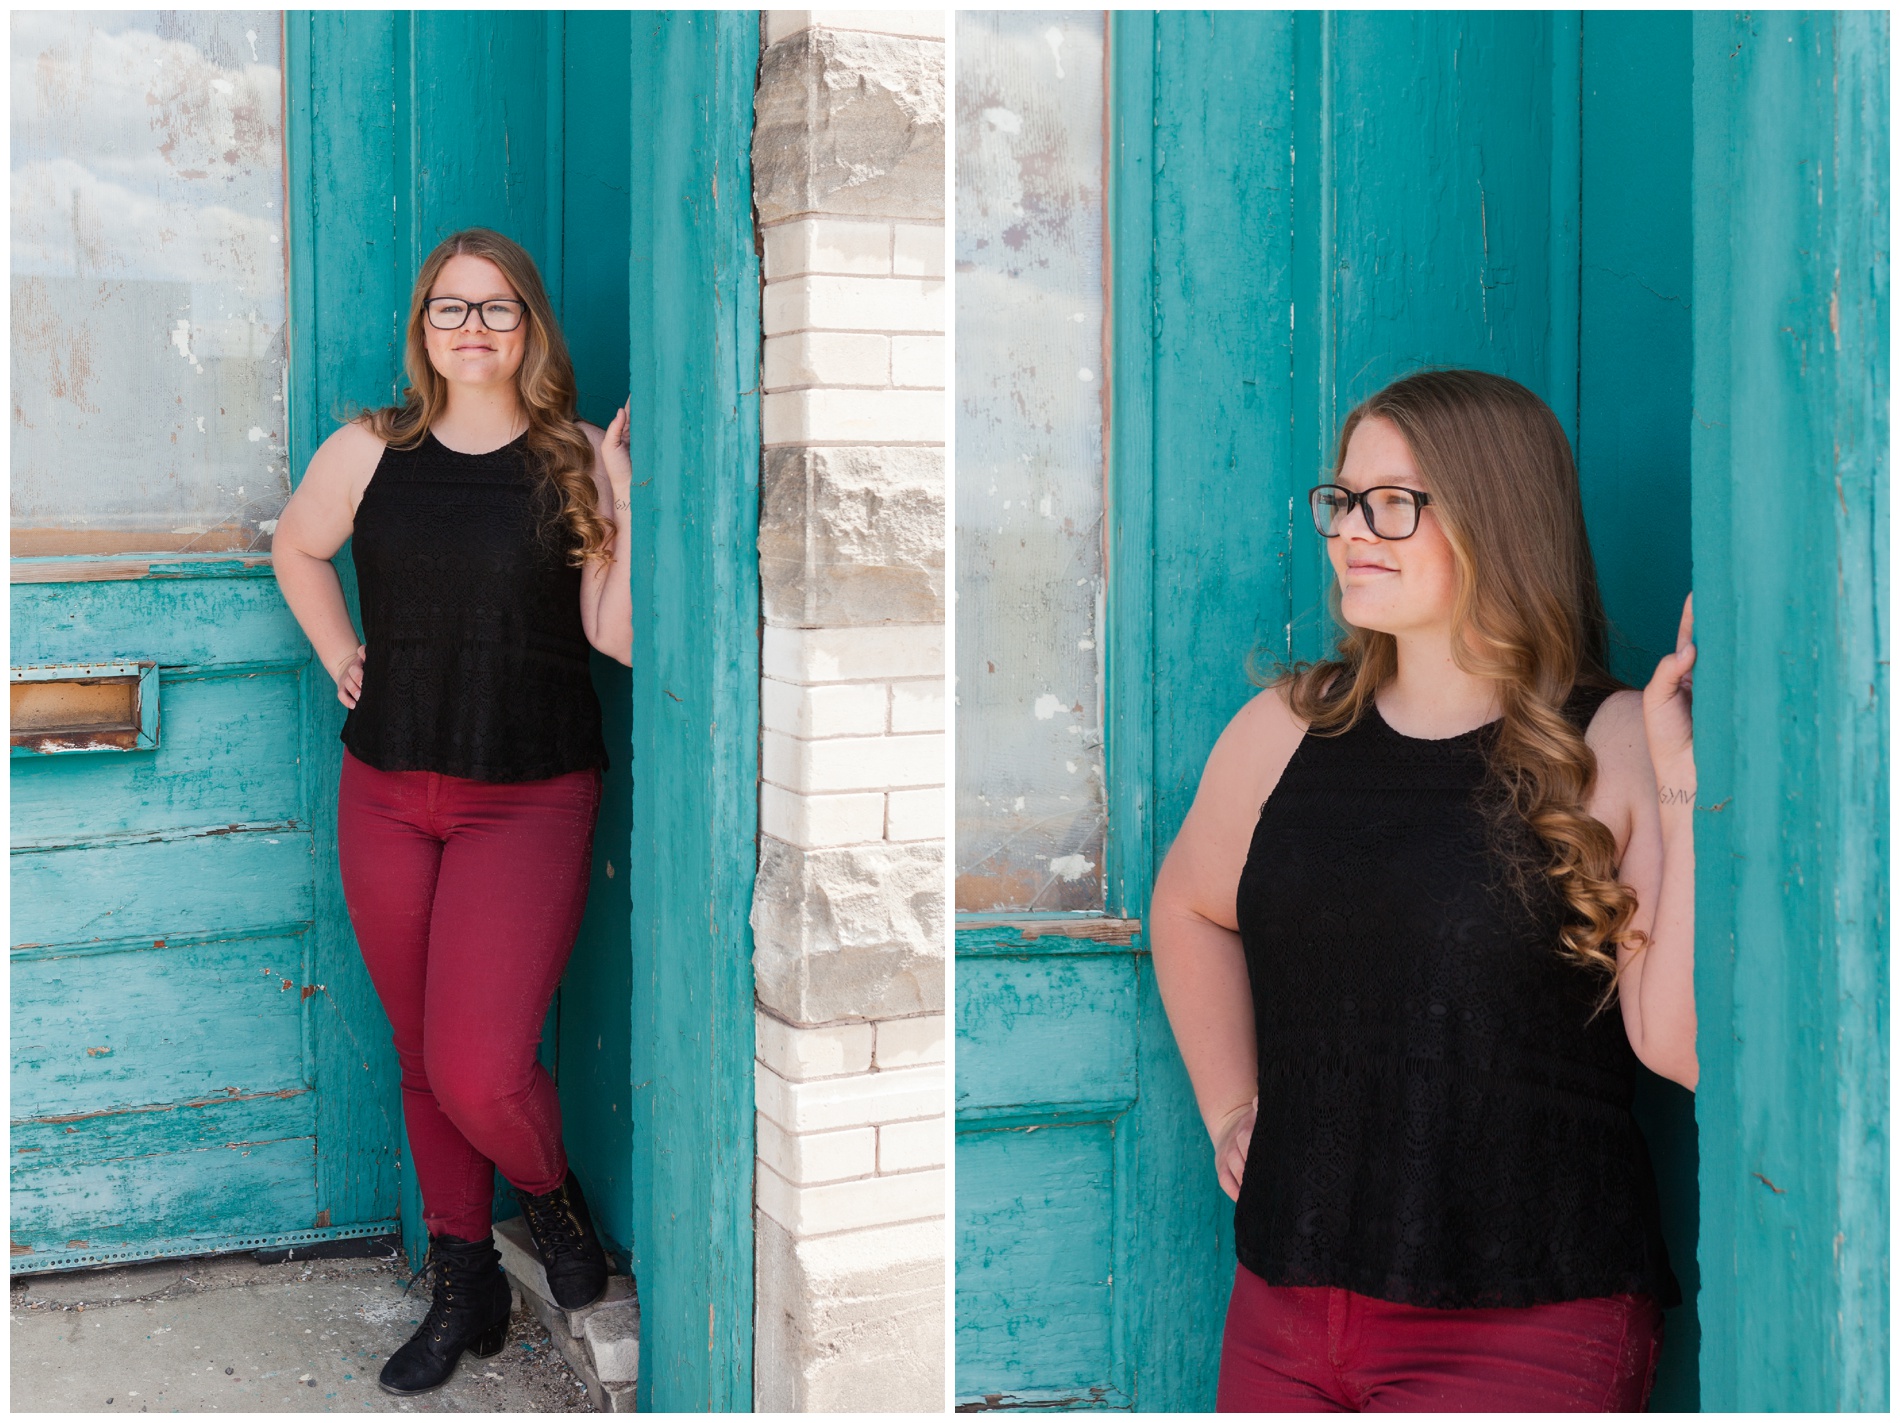 Senior pictures by the turquoise building in downtown Payette, Idaho.